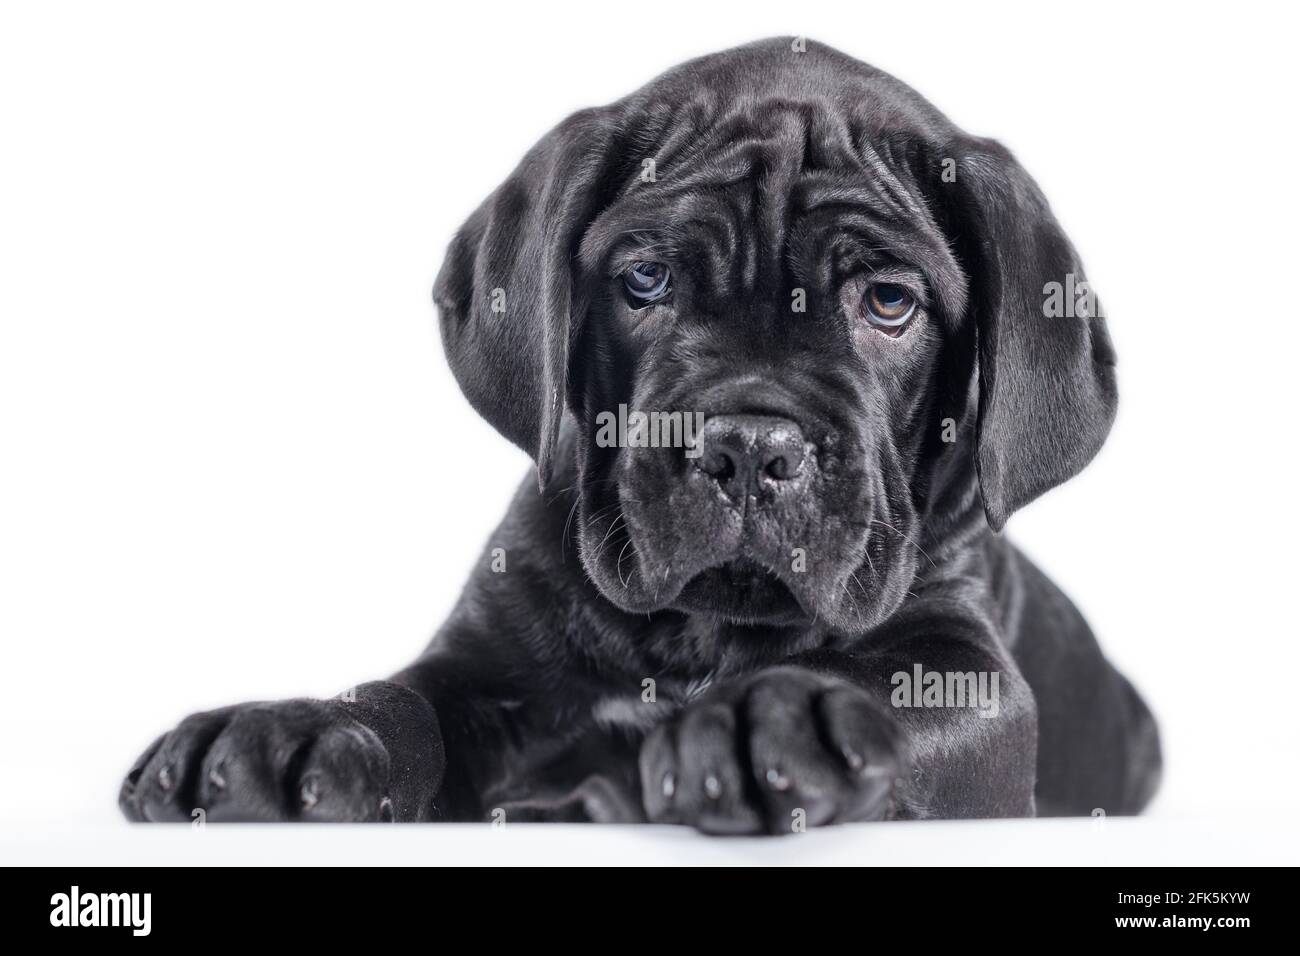 black cane corso puppy looking up on a white background isolated